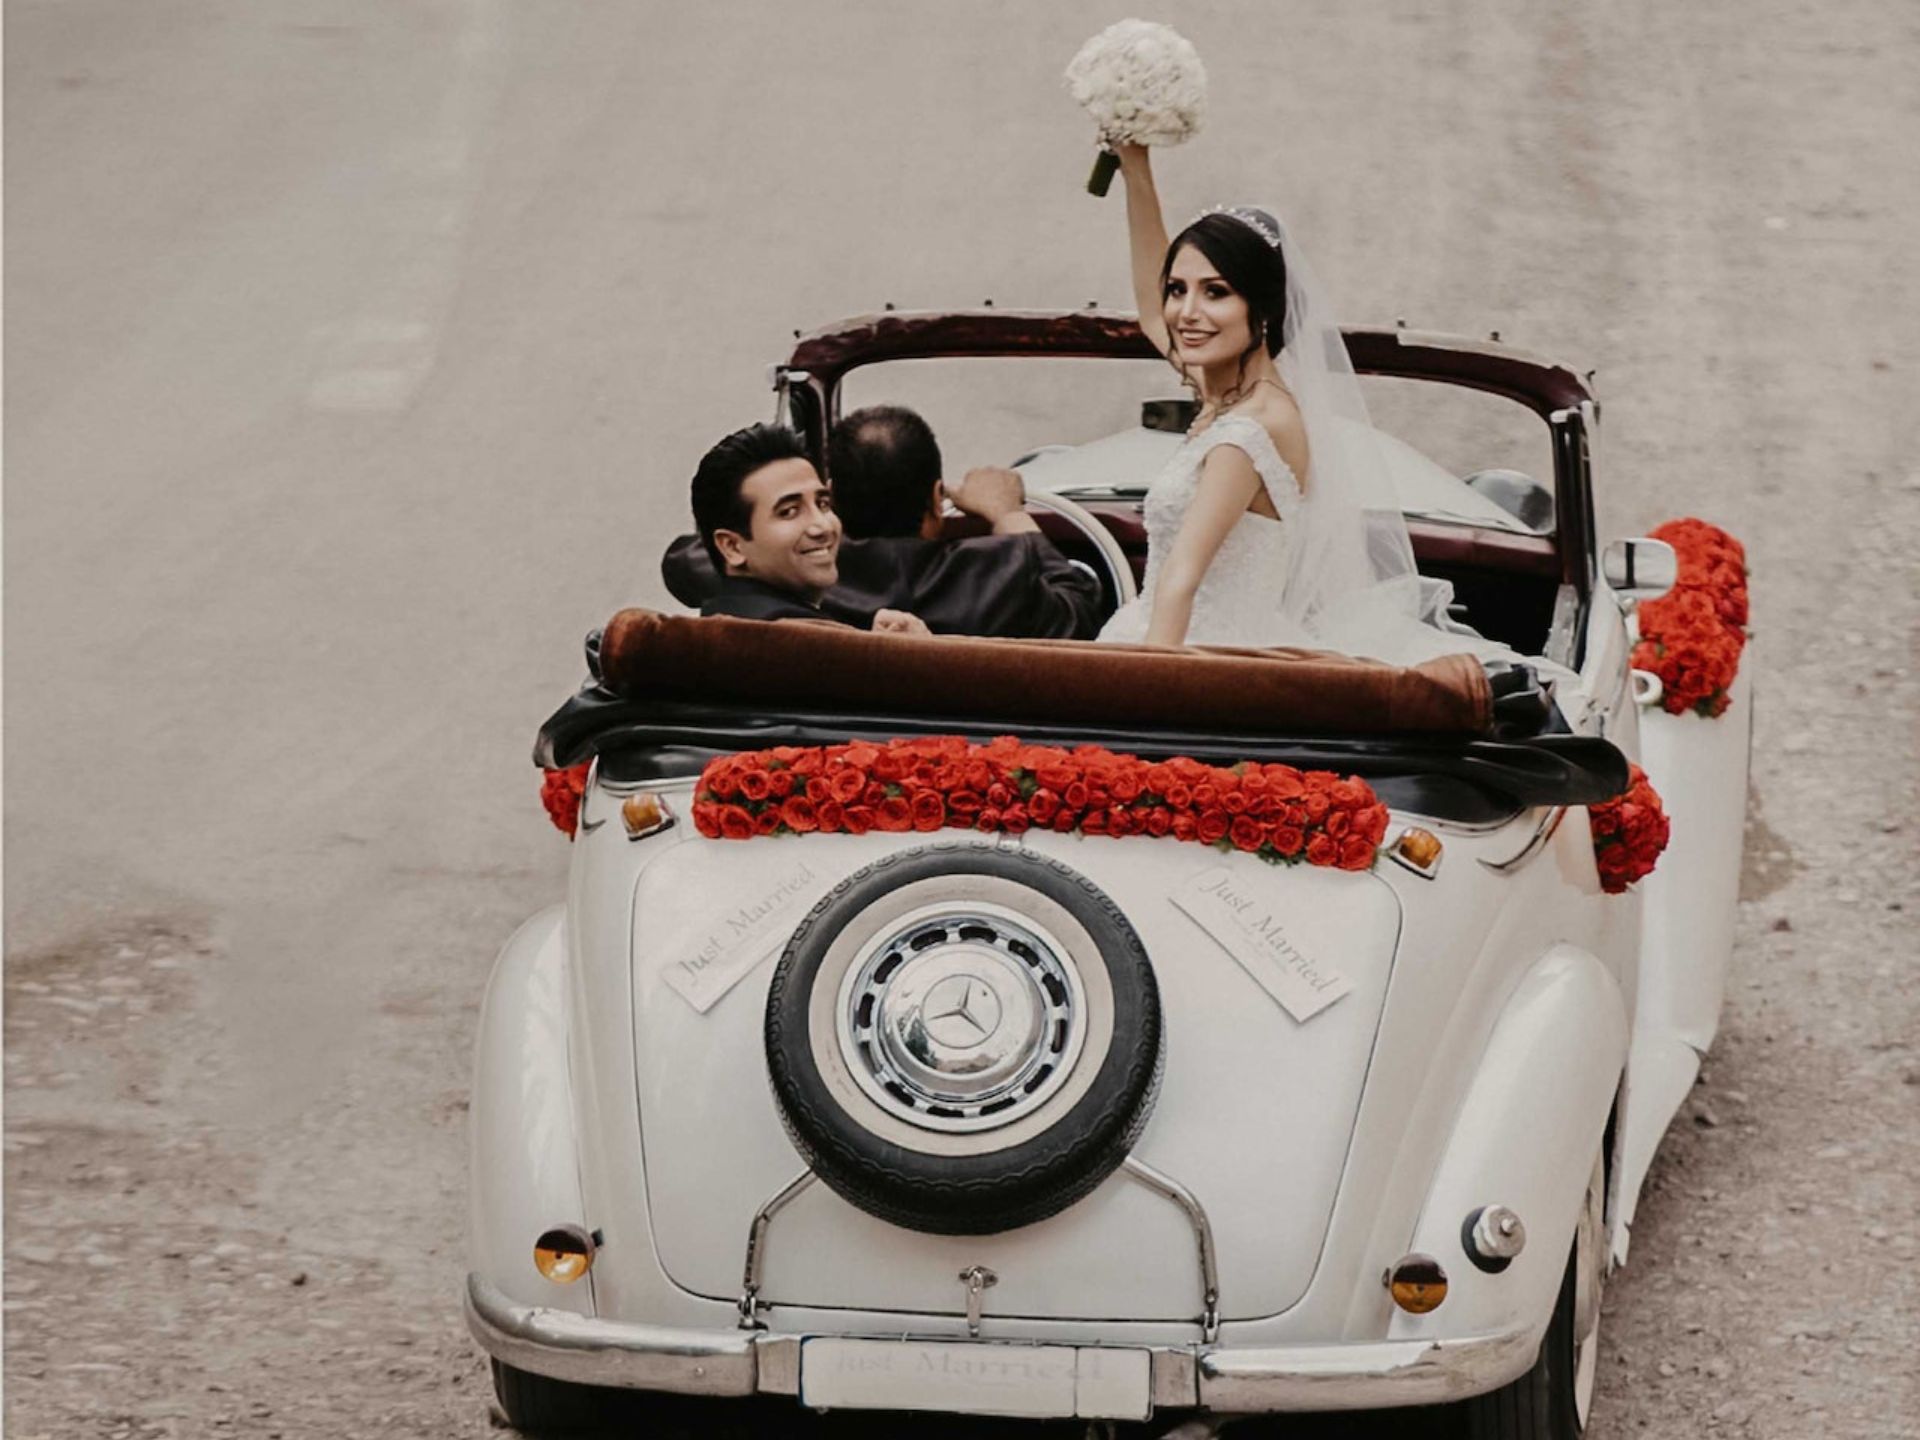 A bride and groom leaving their wedding.